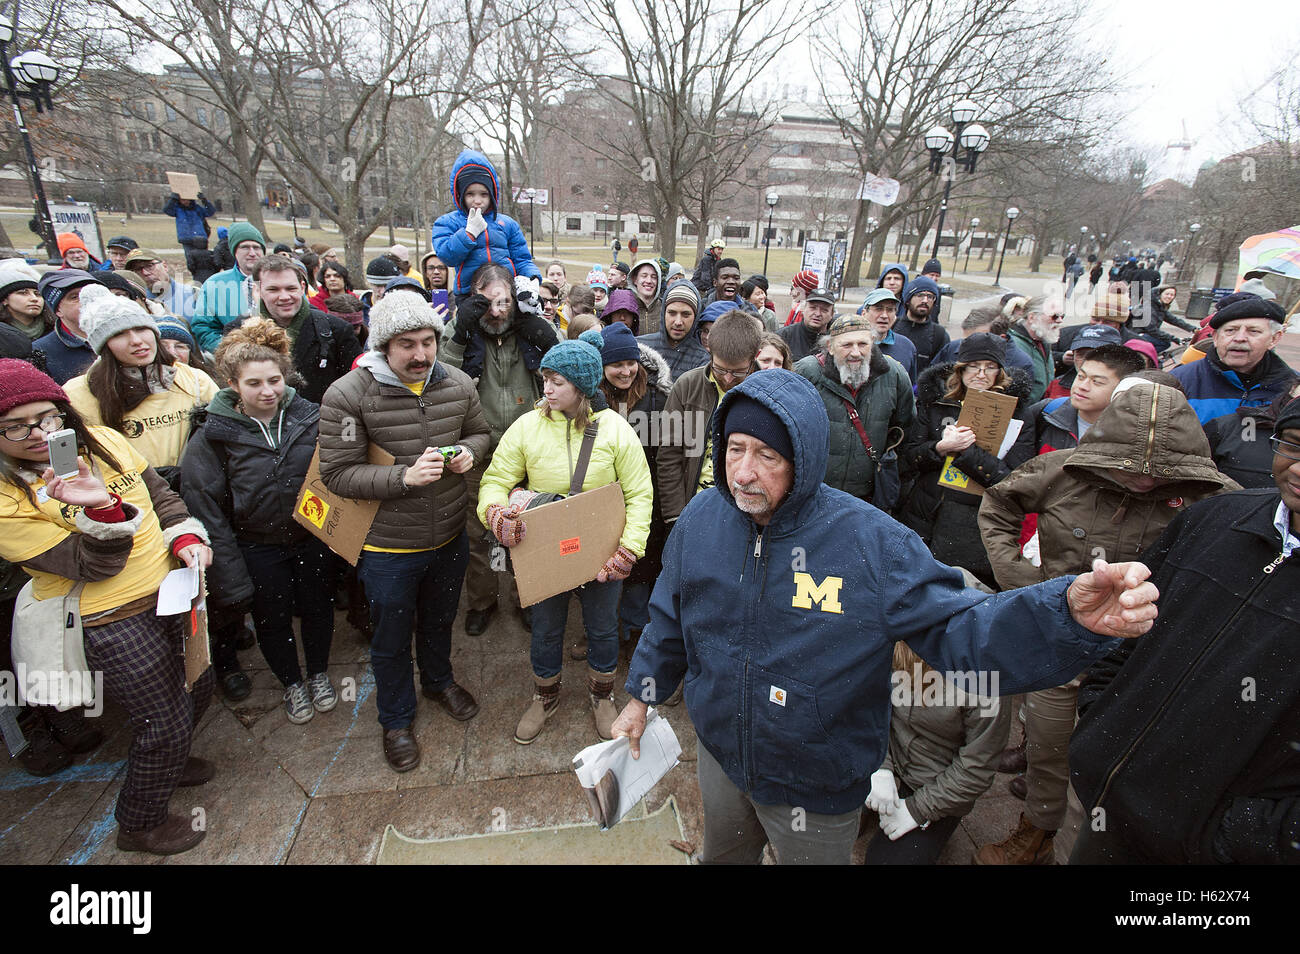 Ann Arbor, MI, USA. 27th Mar, 2015. Anti-war activist Tom Hayden of Los Angeles speaks on the University of Michigan Diag before a Teach-In   50, marking the 50th anniversary of the start of campus protests against the Vietnam War. © Mark Bialek/ZUMA Wire/Alamy Live News Stock Photo